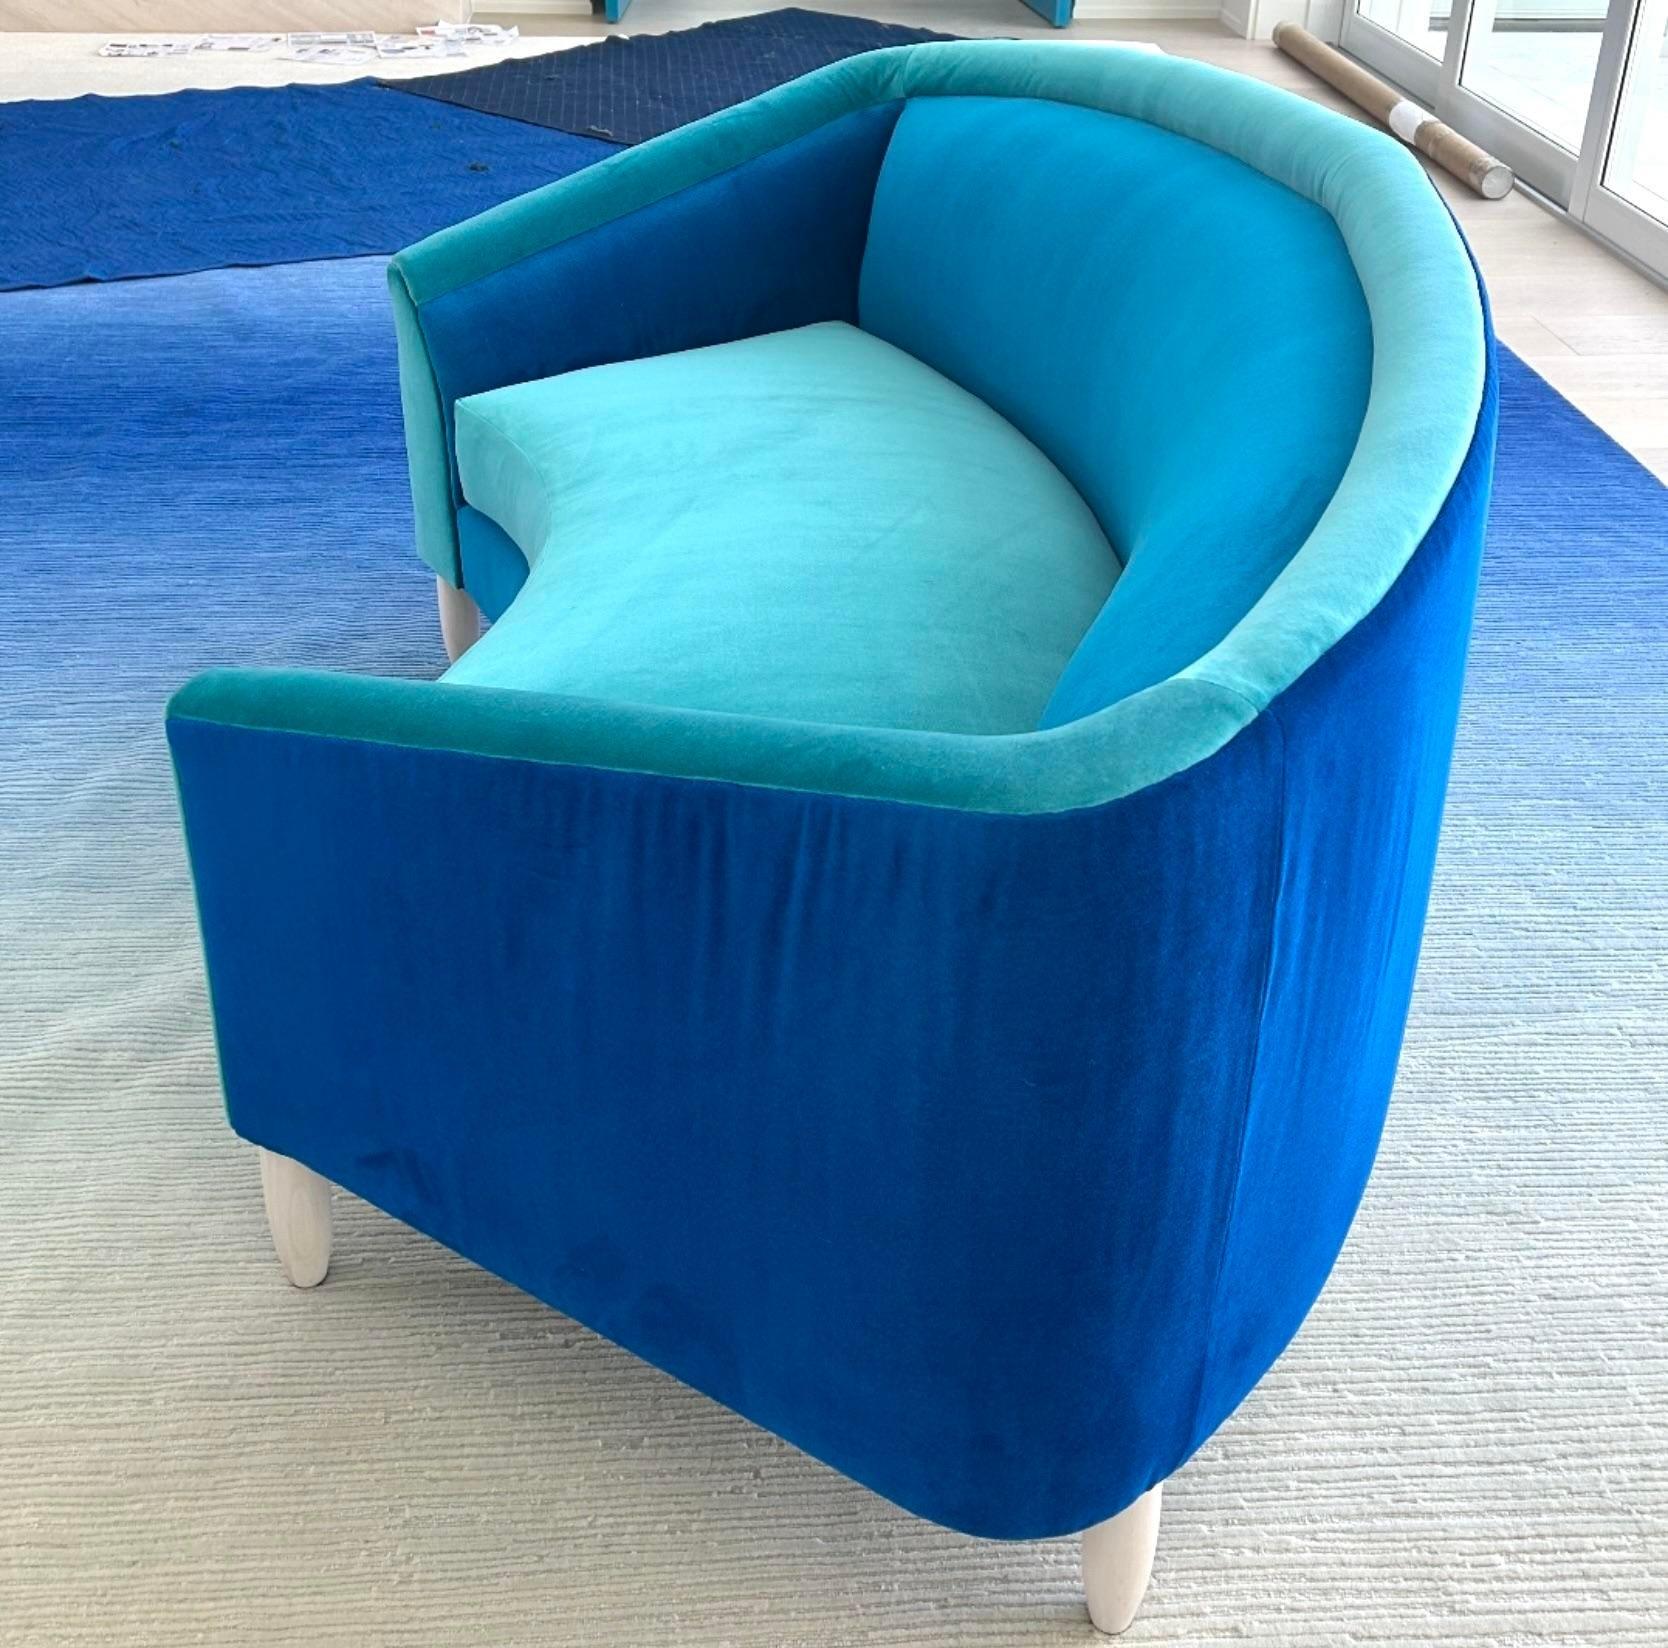 A spectacular custom curved sofa. Designed by the celebrity designer/author Janie Molster. A chic color block design in Holly Hunt performance velvet fabric. Two sofas available on my  page. Acquired from a Naples estate.